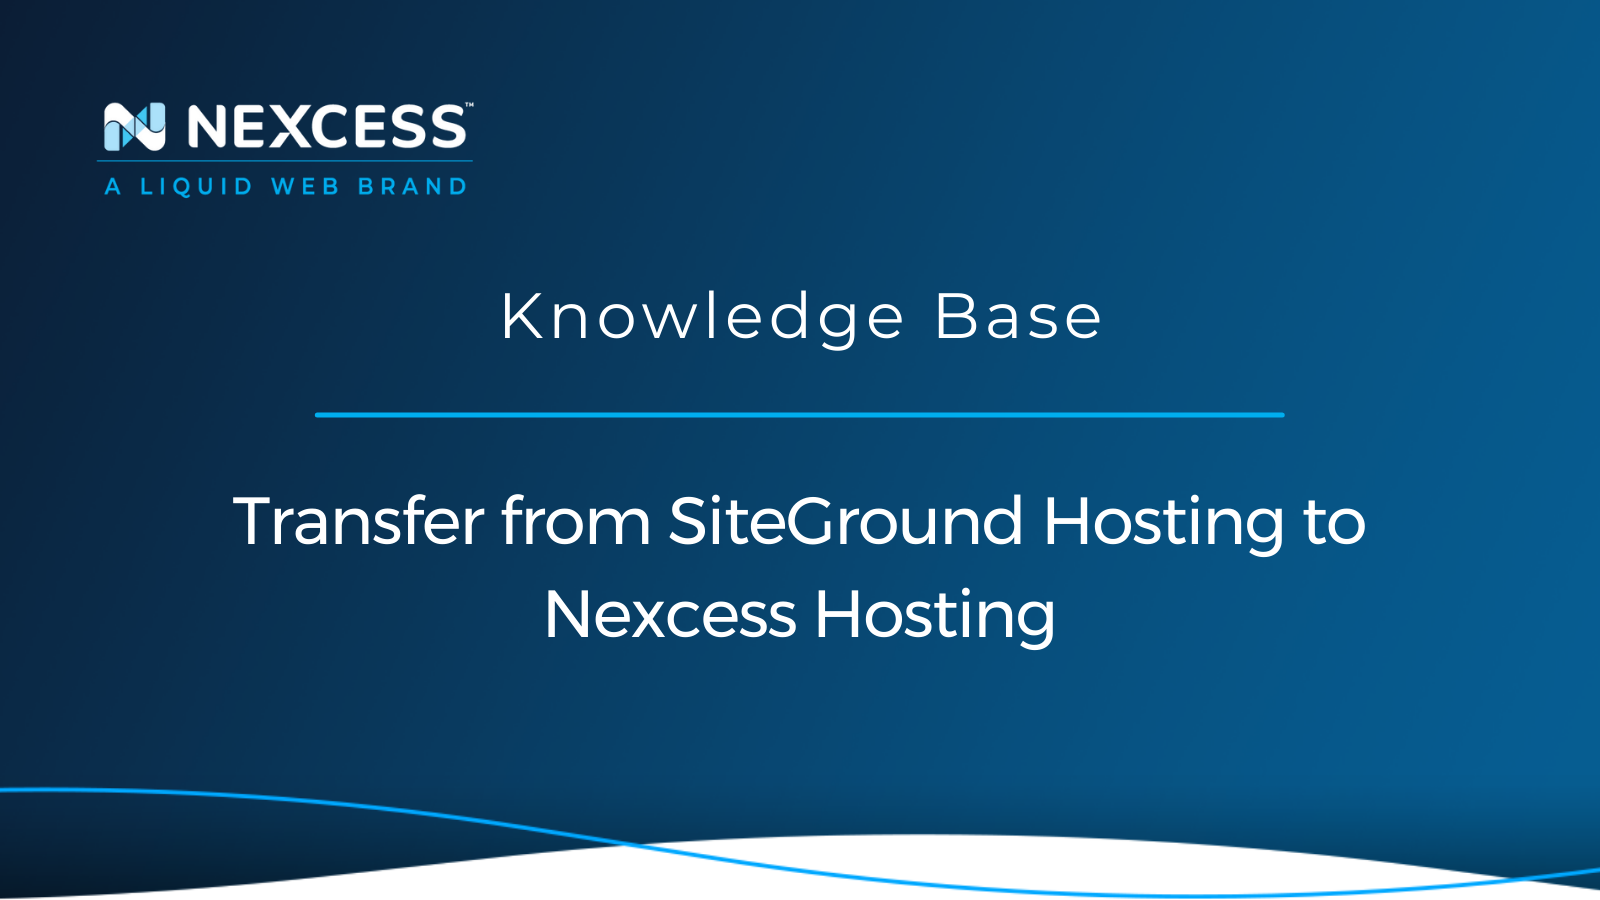 Transfer from SiteGround Hosting to Nexcess Hosting